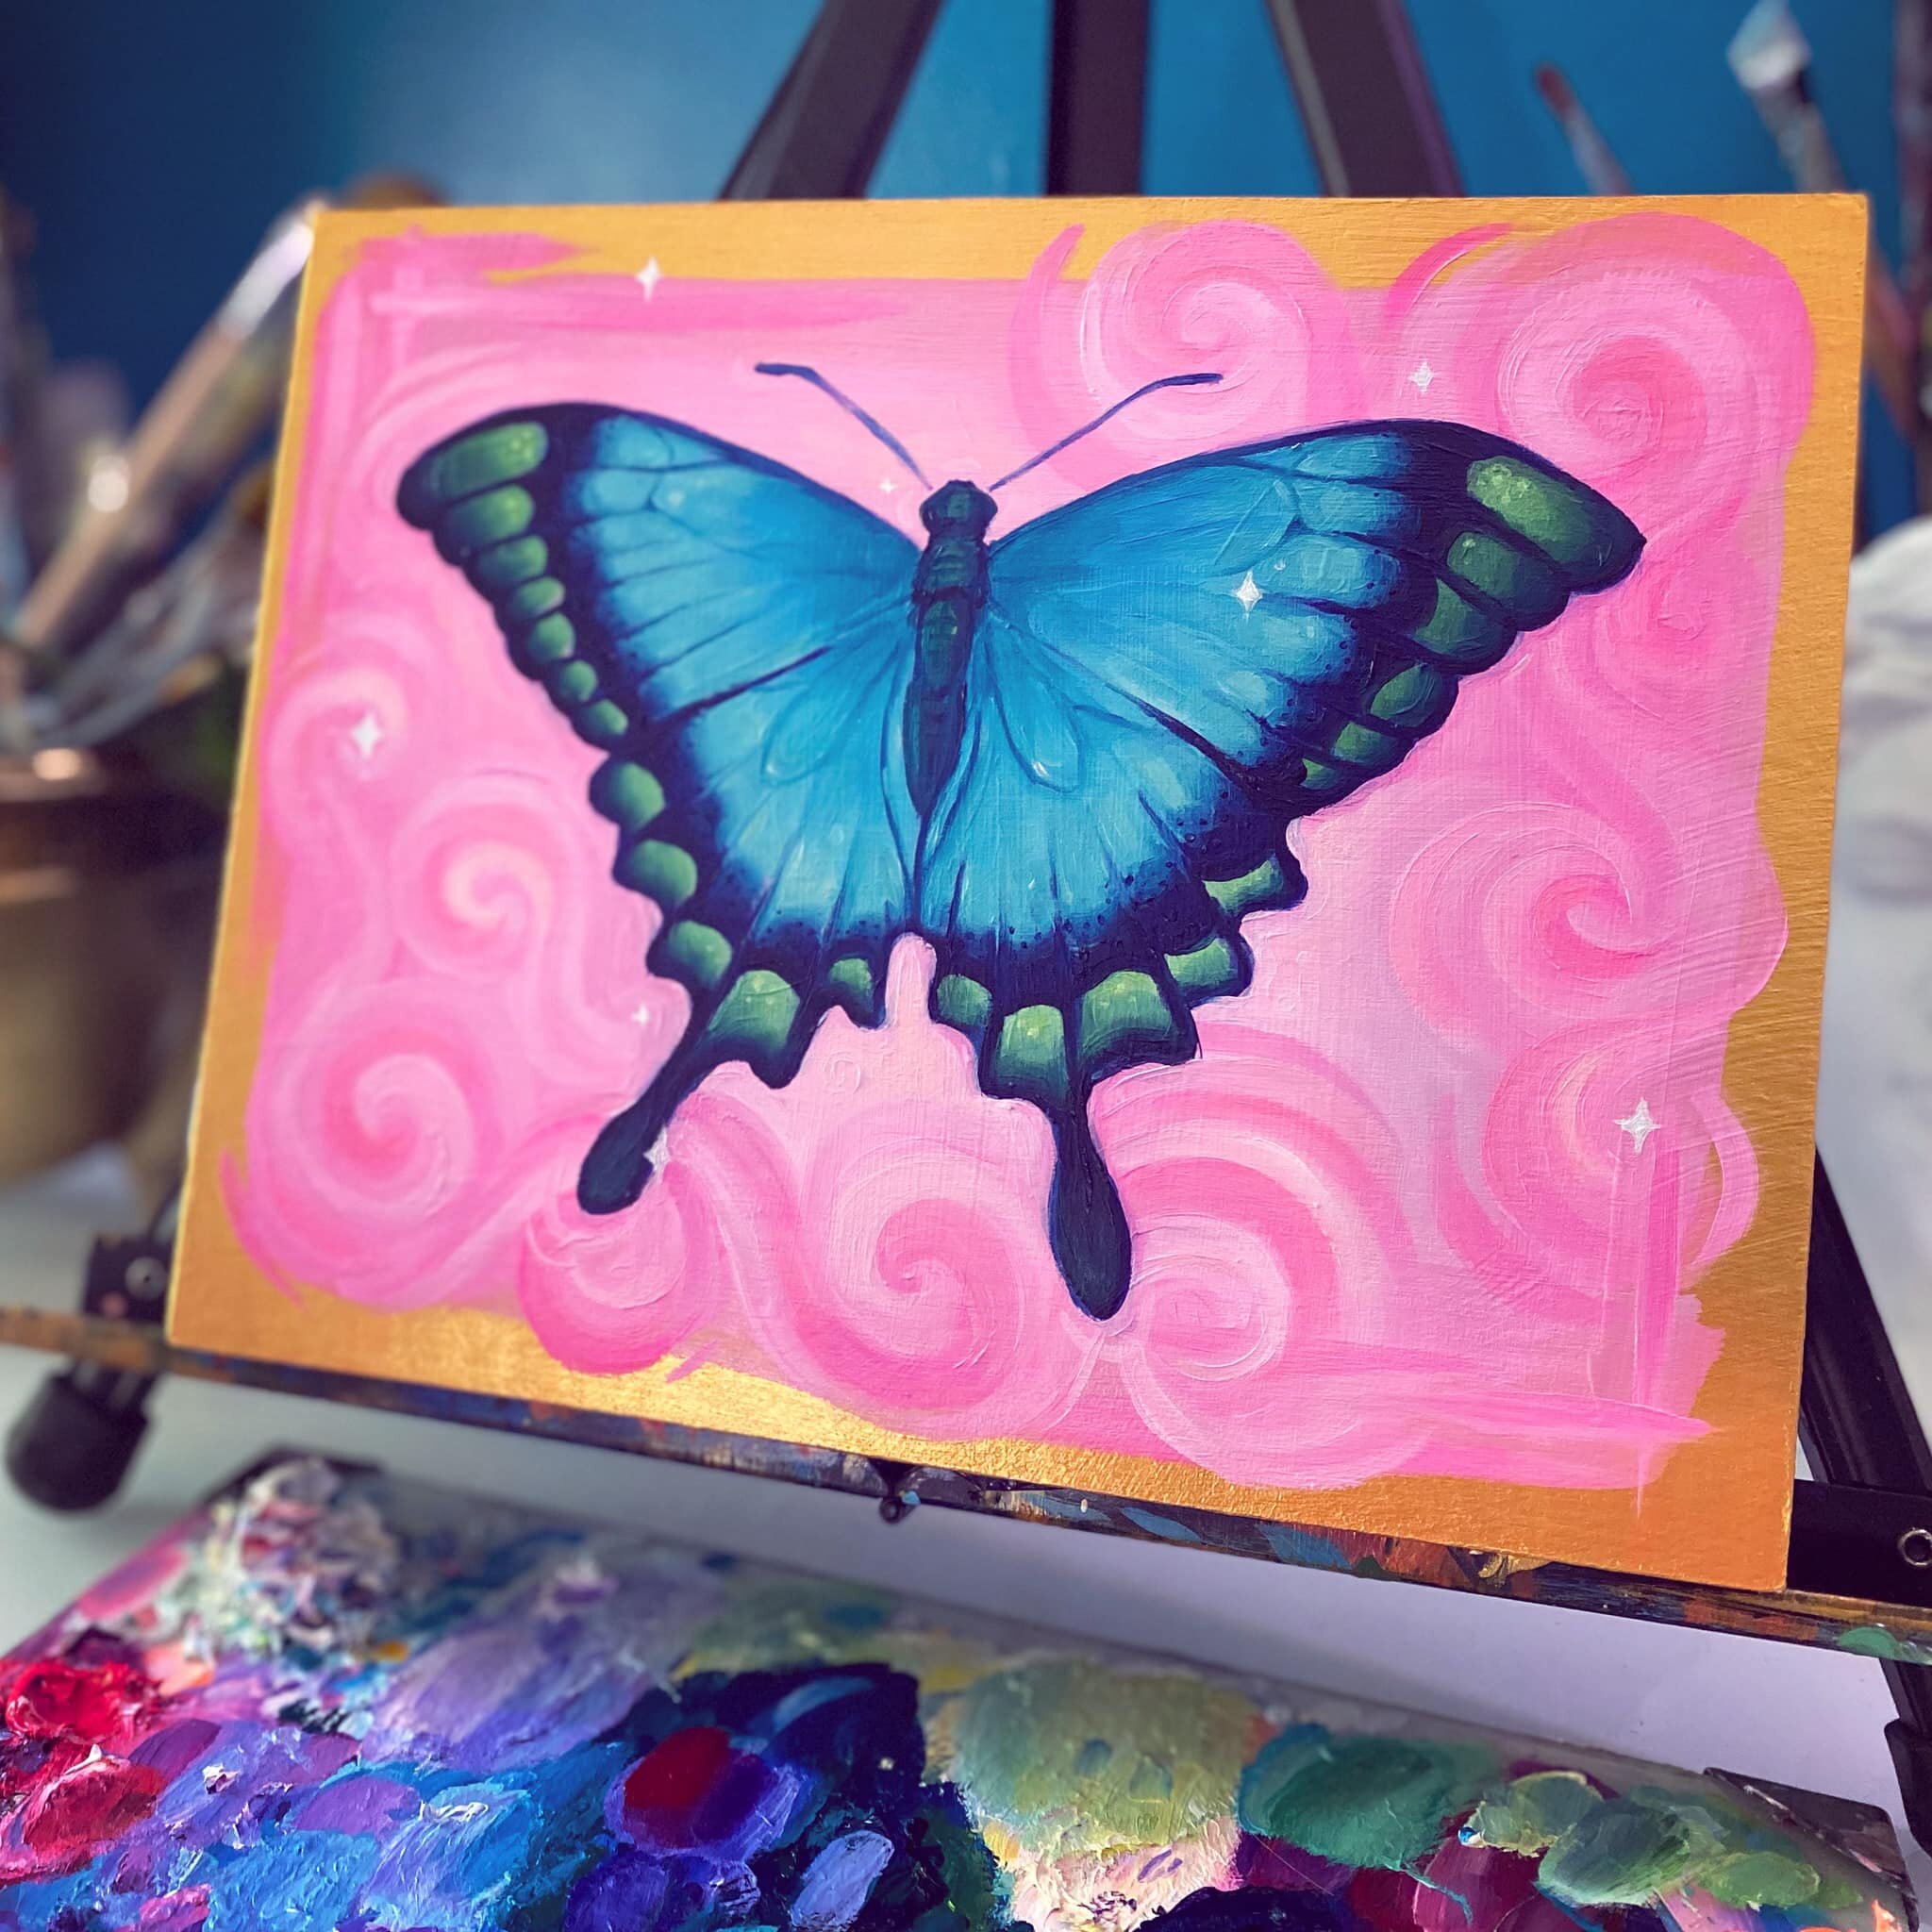 ✨💜🦋 Wish on a Wing 🦋💜✨

One of the many lovely originals currently on ✨S✨A✨L✨E✨! This only happens once a year, so if you've been eyeing something now is the time. Have fun babes!
~
~
~
 #artforsale #artist #artofinstagram #artoftheday #artistoni